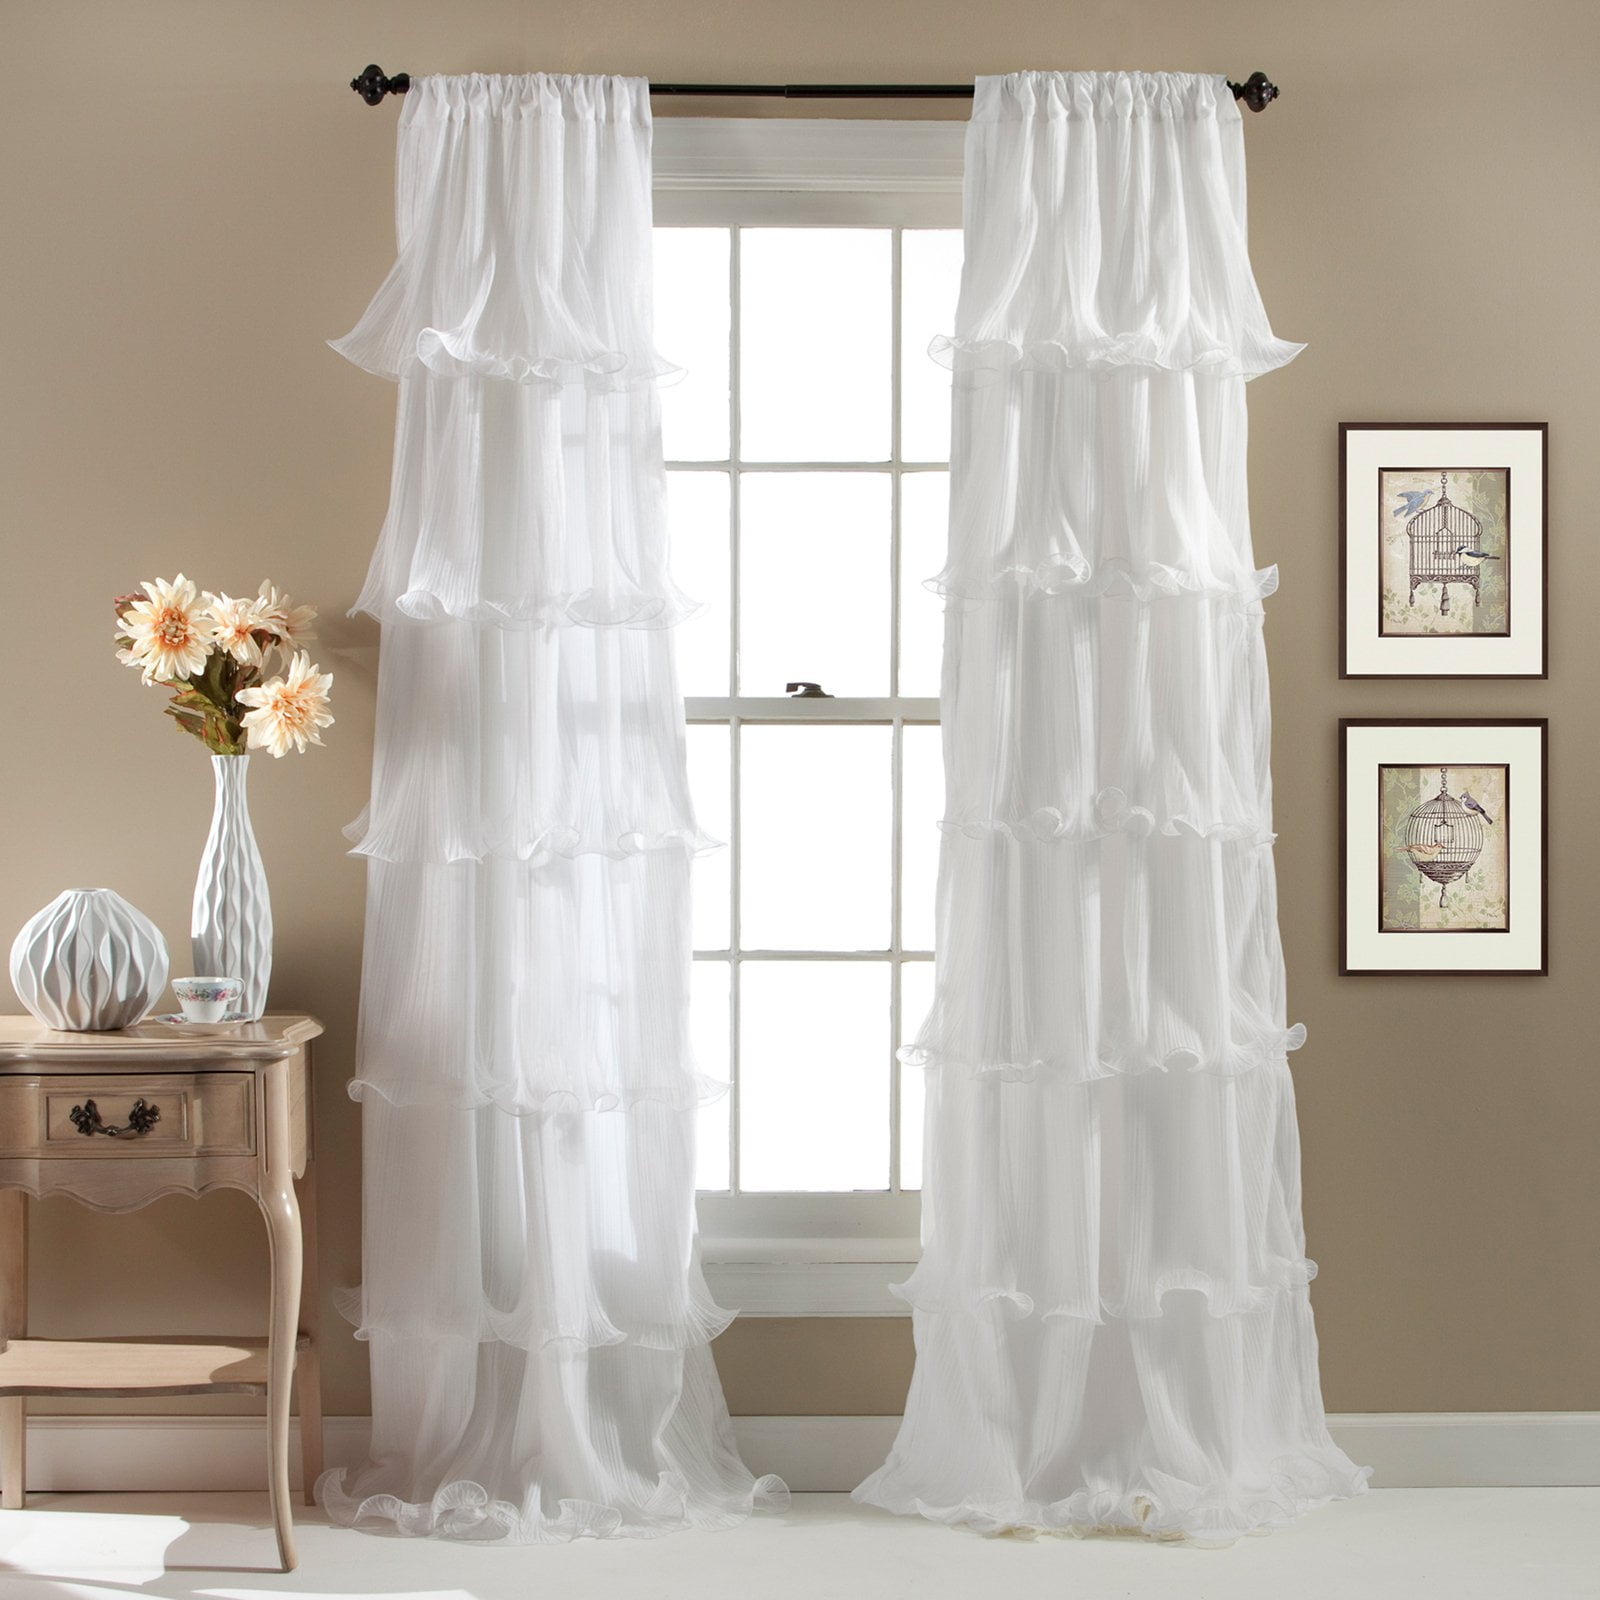 SHORT MULTILAYERS VOILE SHEER FABRIC WINDOW CURTAIN RUFFLE PANEL 1PC GYPSY NEW 